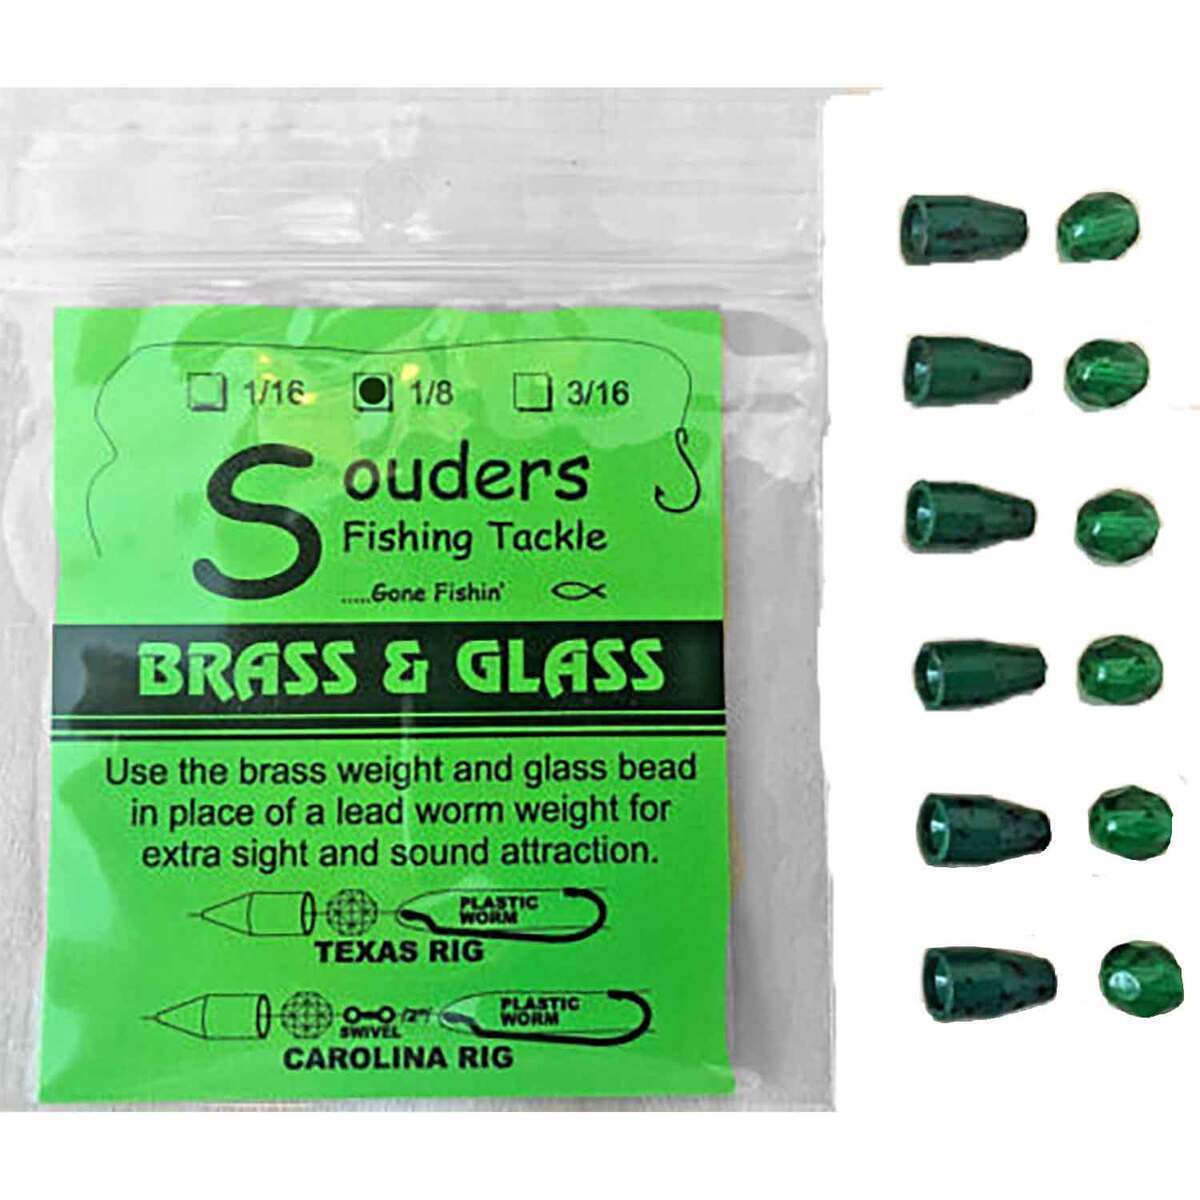 Souders Fishing Tackle Brass and Glass Sinkers - Green/Green, 1/8oz - Green/Green 1/8oz by Sportsman's Warehouse